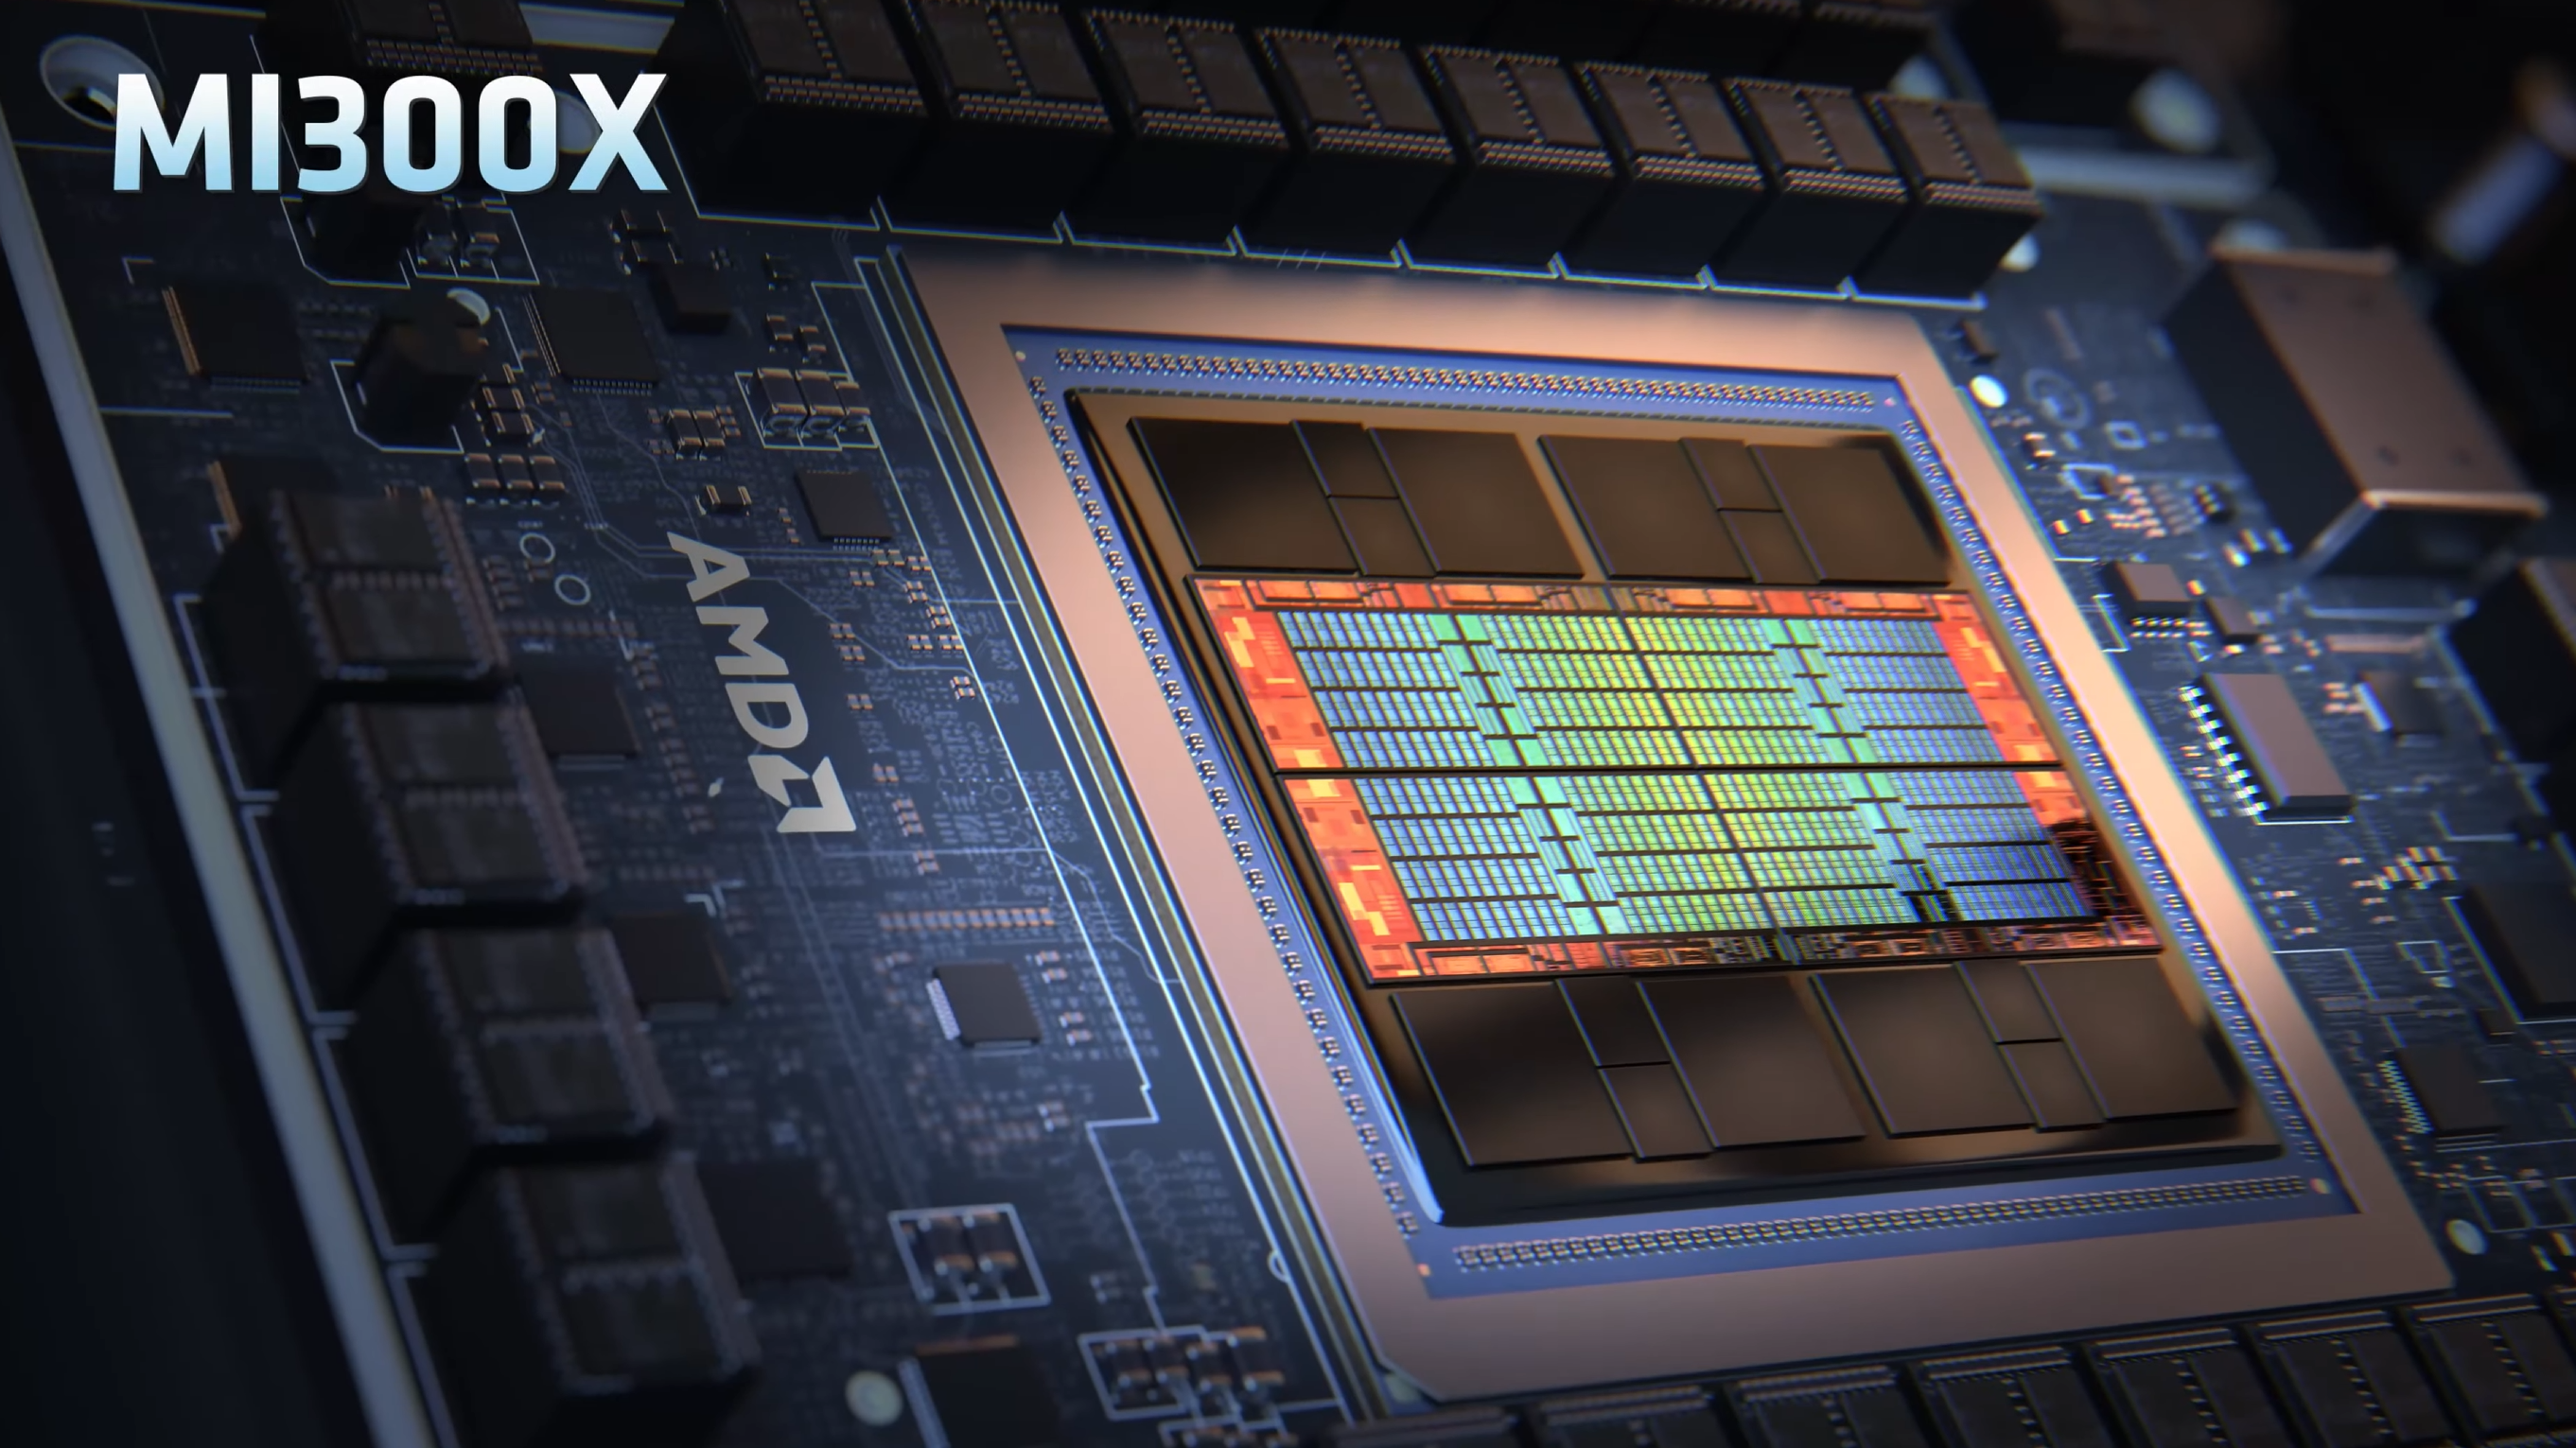 AMD enters AI chip arena with Instinct MI300X, but Nvidia's H200 looms large